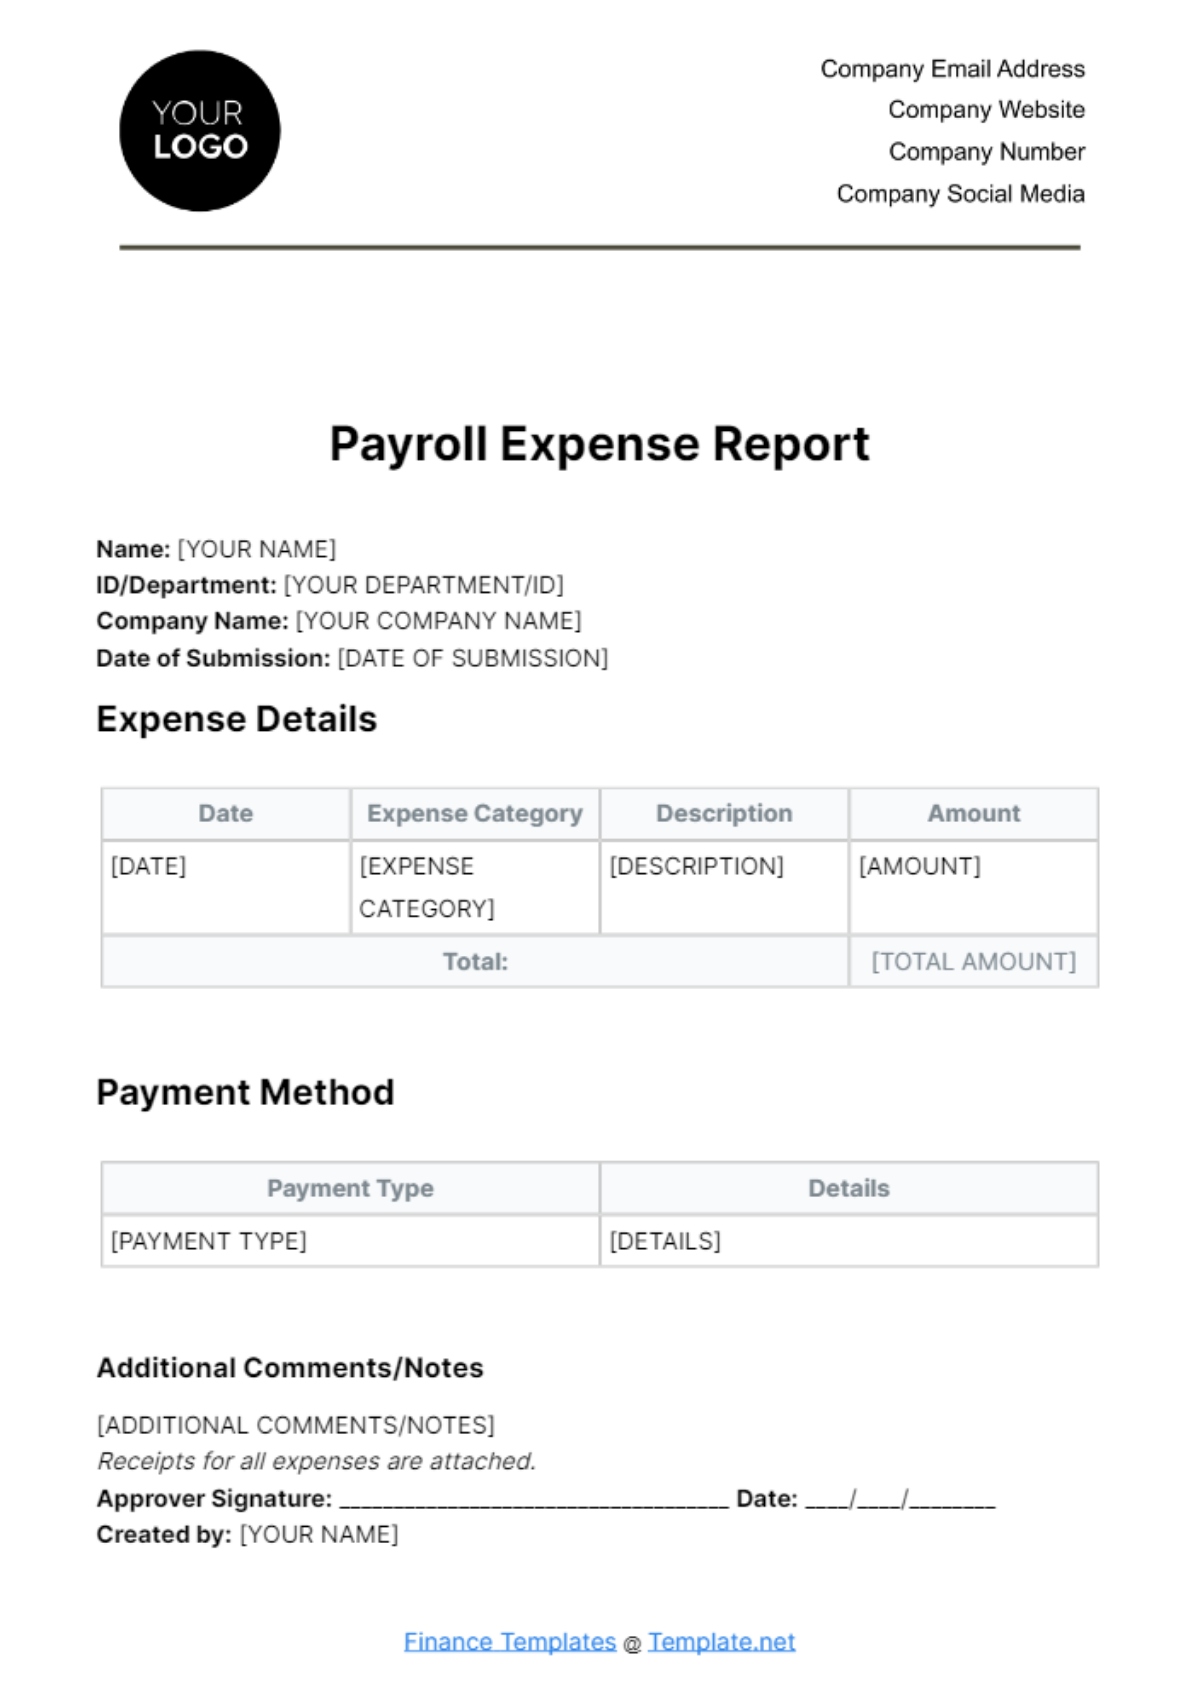 Free Finance Payroll Expense Report Template